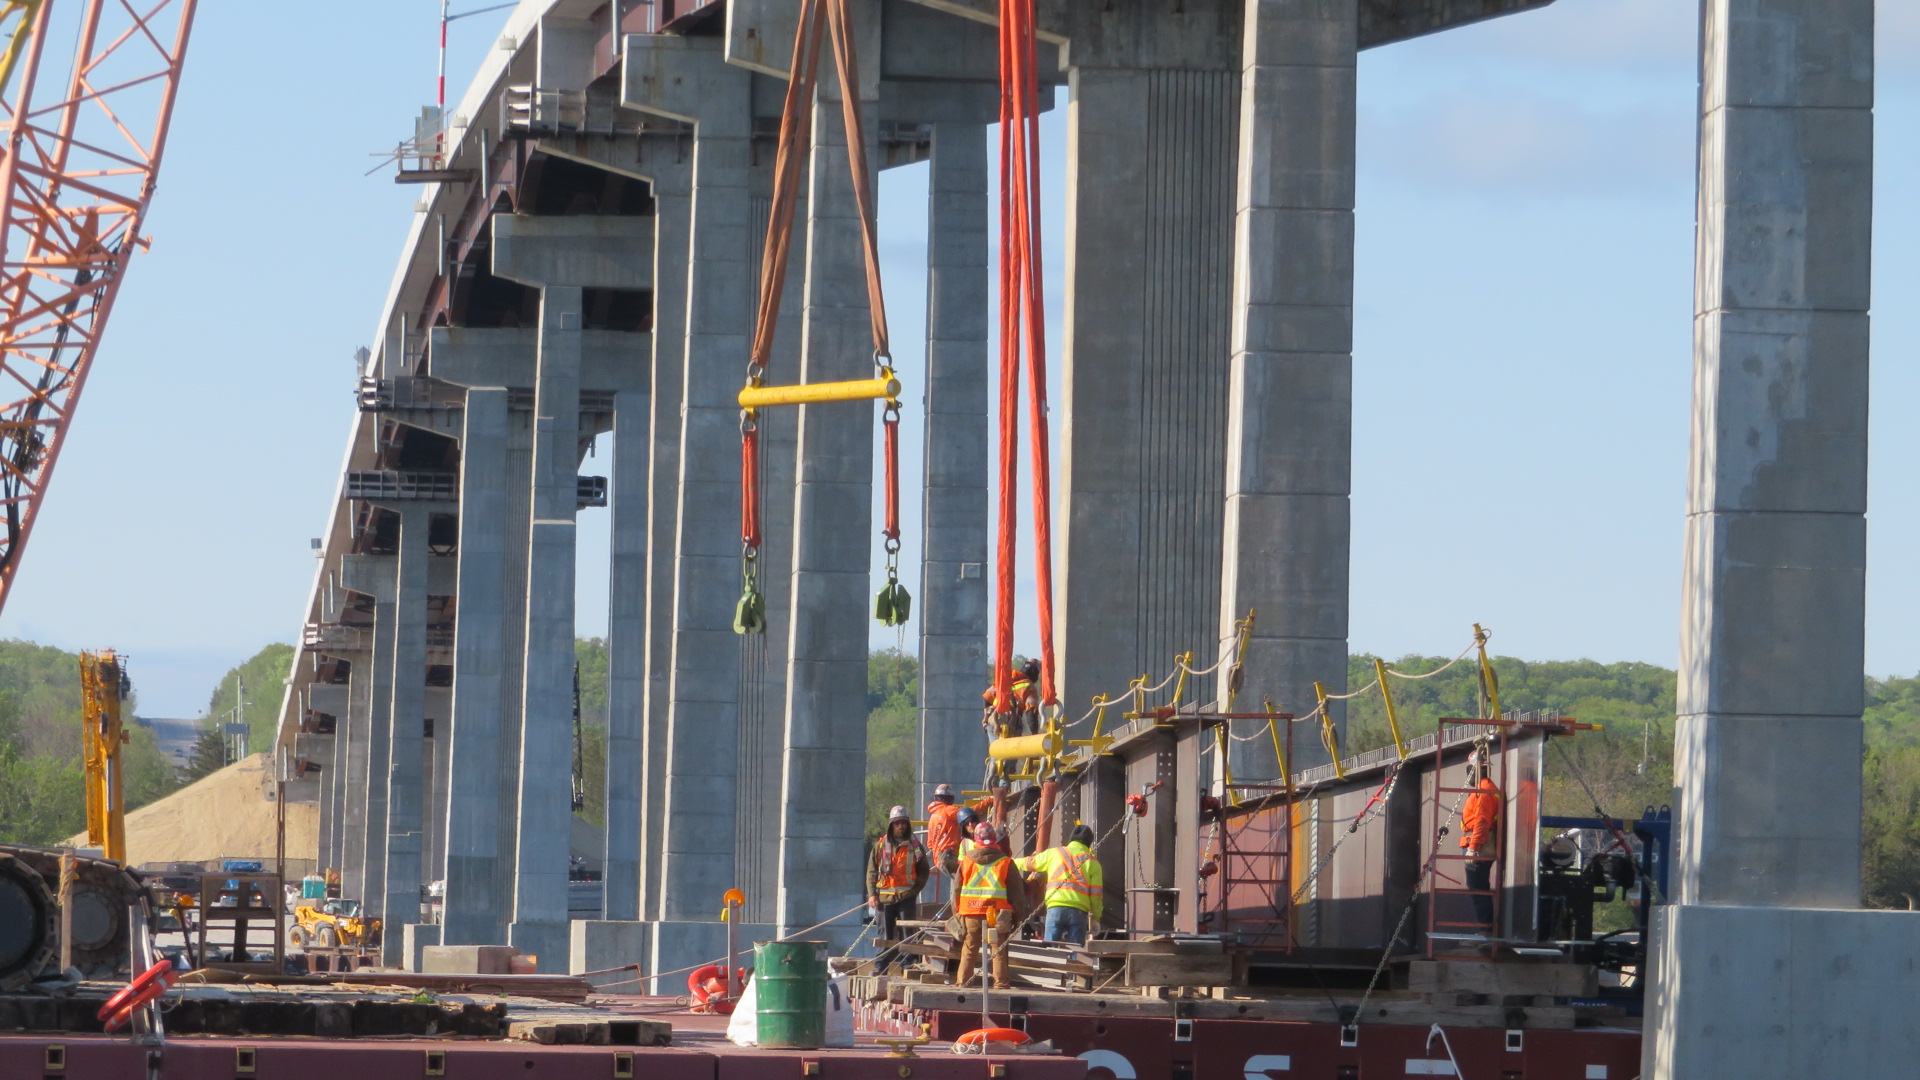 Moving the rigging into place above the girders